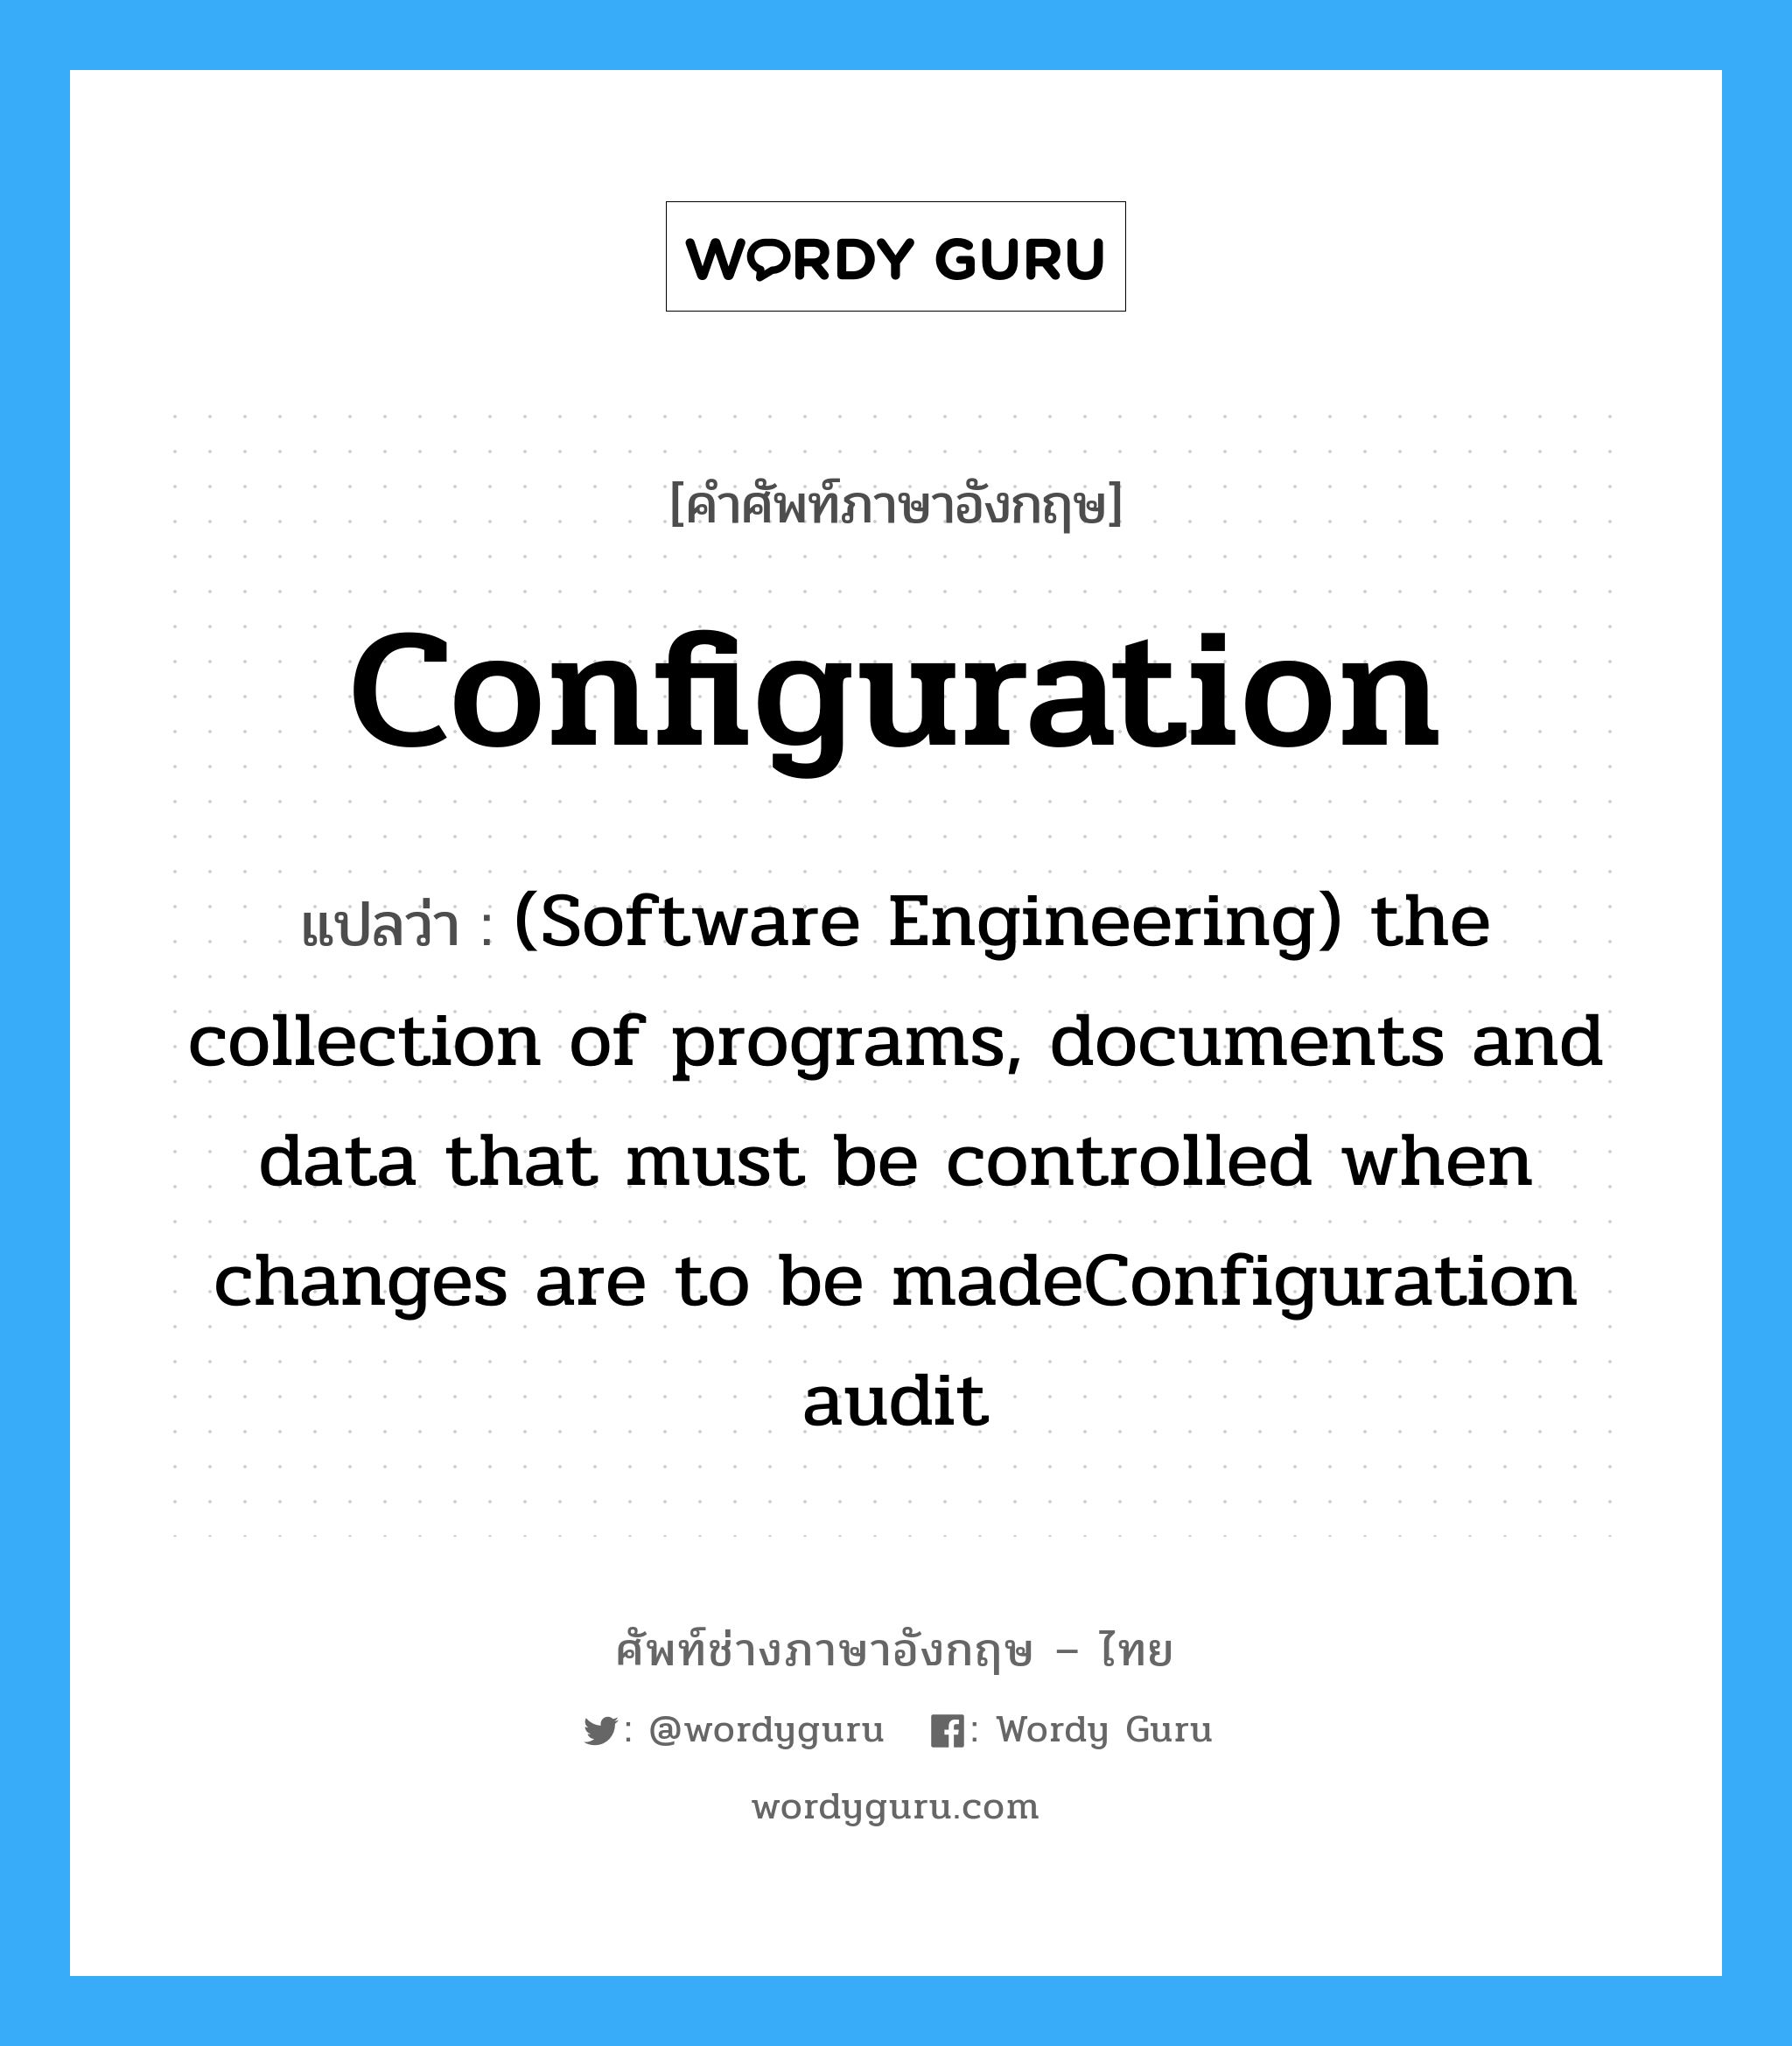 (Software Engineering) the collection of programs, documents and data that must be controlled when changes are to be madeConfiguration audit ภาษาอังกฤษ?, คำศัพท์ช่างภาษาอังกฤษ - ไทย (Software Engineering) the collection of programs, documents and data that must be controlled when changes are to be madeConfiguration audit คำศัพท์ภาษาอังกฤษ (Software Engineering) the collection of programs, documents and data that must be controlled when changes are to be madeConfiguration audit แปลว่า Configuration